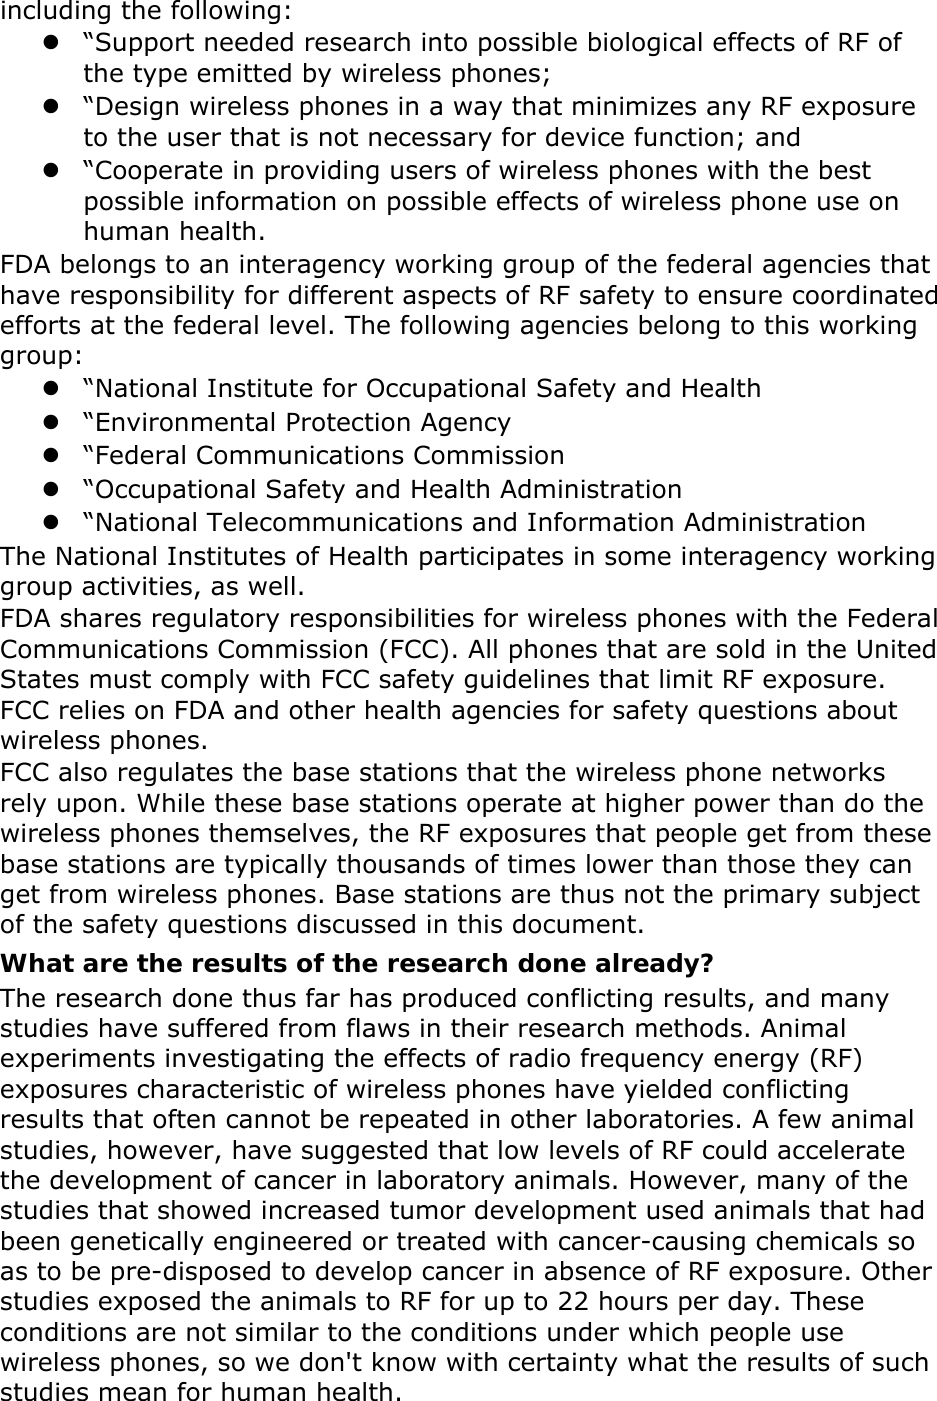 including the following: z “Support needed research into possible biological effects of RF of the type emitted by wireless phones; z “Design wireless phones in a way that minimizes any RF exposure to the user that is not necessary for device function; and z “Cooperate in providing users of wireless phones with the best possible information on possible effects of wireless phone use on human health. FDA belongs to an interagency working group of the federal agencies that have responsibility for different aspects of RF safety to ensure coordinated efforts at the federal level. The following agencies belong to this working group: z “National Institute for Occupational Safety and Health z “Environmental Protection Agency z “Federal Communications Commission z “Occupational Safety and Health Administration z “National Telecommunications and Information Administration The National Institutes of Health participates in some interagency working group activities, as well. FDA shares regulatory responsibilities for wireless phones with the Federal Communications Commission (FCC). All phones that are sold in the United States must comply with FCC safety guidelines that limit RF exposure. FCC relies on FDA and other health agencies for safety questions about wireless phones. FCC also regulates the base stations that the wireless phone networks rely upon. While these base stations operate at higher power than do the wireless phones themselves, the RF exposures that people get from these base stations are typically thousands of times lower than those they can get from wireless phones. Base stations are thus not the primary subject of the safety questions discussed in this document. What are the results of the research done already? The research done thus far has produced conflicting results, and many studies have suffered from flaws in their research methods. Animal experiments investigating the effects of radio frequency energy (RF) exposures characteristic of wireless phones have yielded conflicting results that often cannot be repeated in other laboratories. A few animal studies, however, have suggested that low levels of RF could accelerate the development of cancer in laboratory animals. However, many of the studies that showed increased tumor development used animals that had been genetically engineered or treated with cancer-causing chemicals so as to be pre-disposed to develop cancer in absence of RF exposure. Other studies exposed the animals to RF for up to 22 hours per day. These conditions are not similar to the conditions under which people use wireless phones, so we don&apos;t know with certainty what the results of such studies mean for human health. 